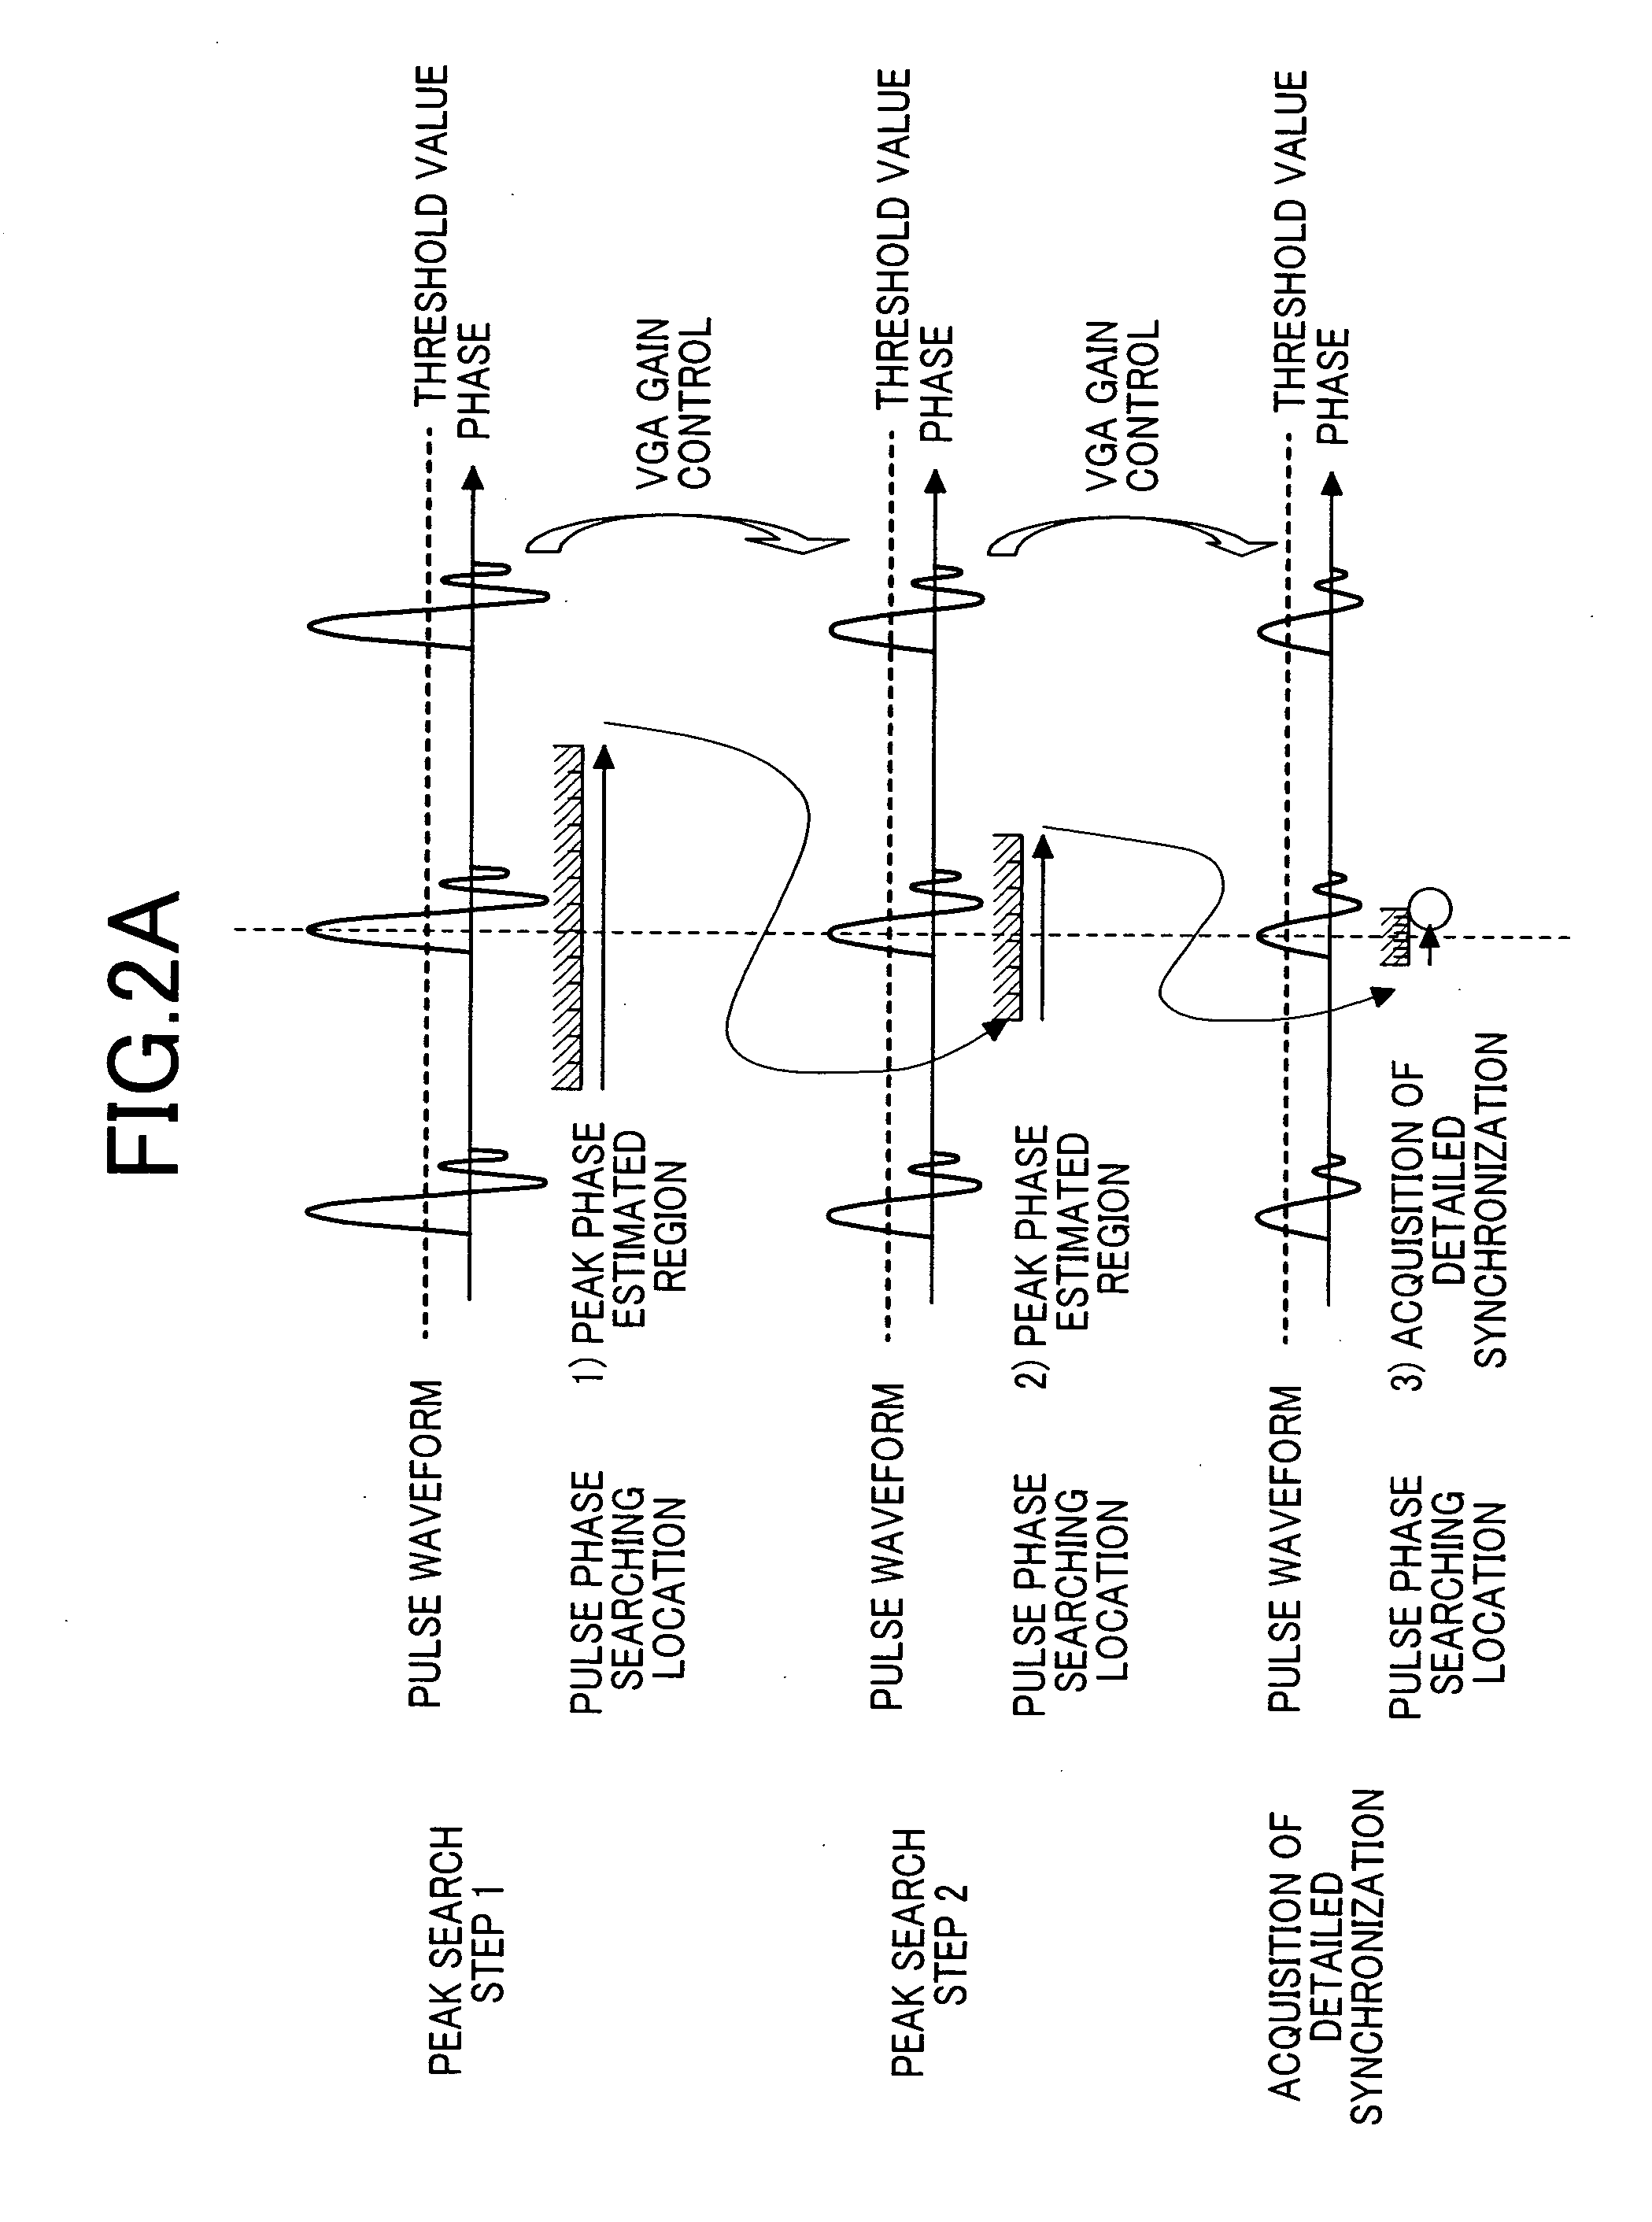 Receiving apparatus, communication apparatus and control apparatus using the same